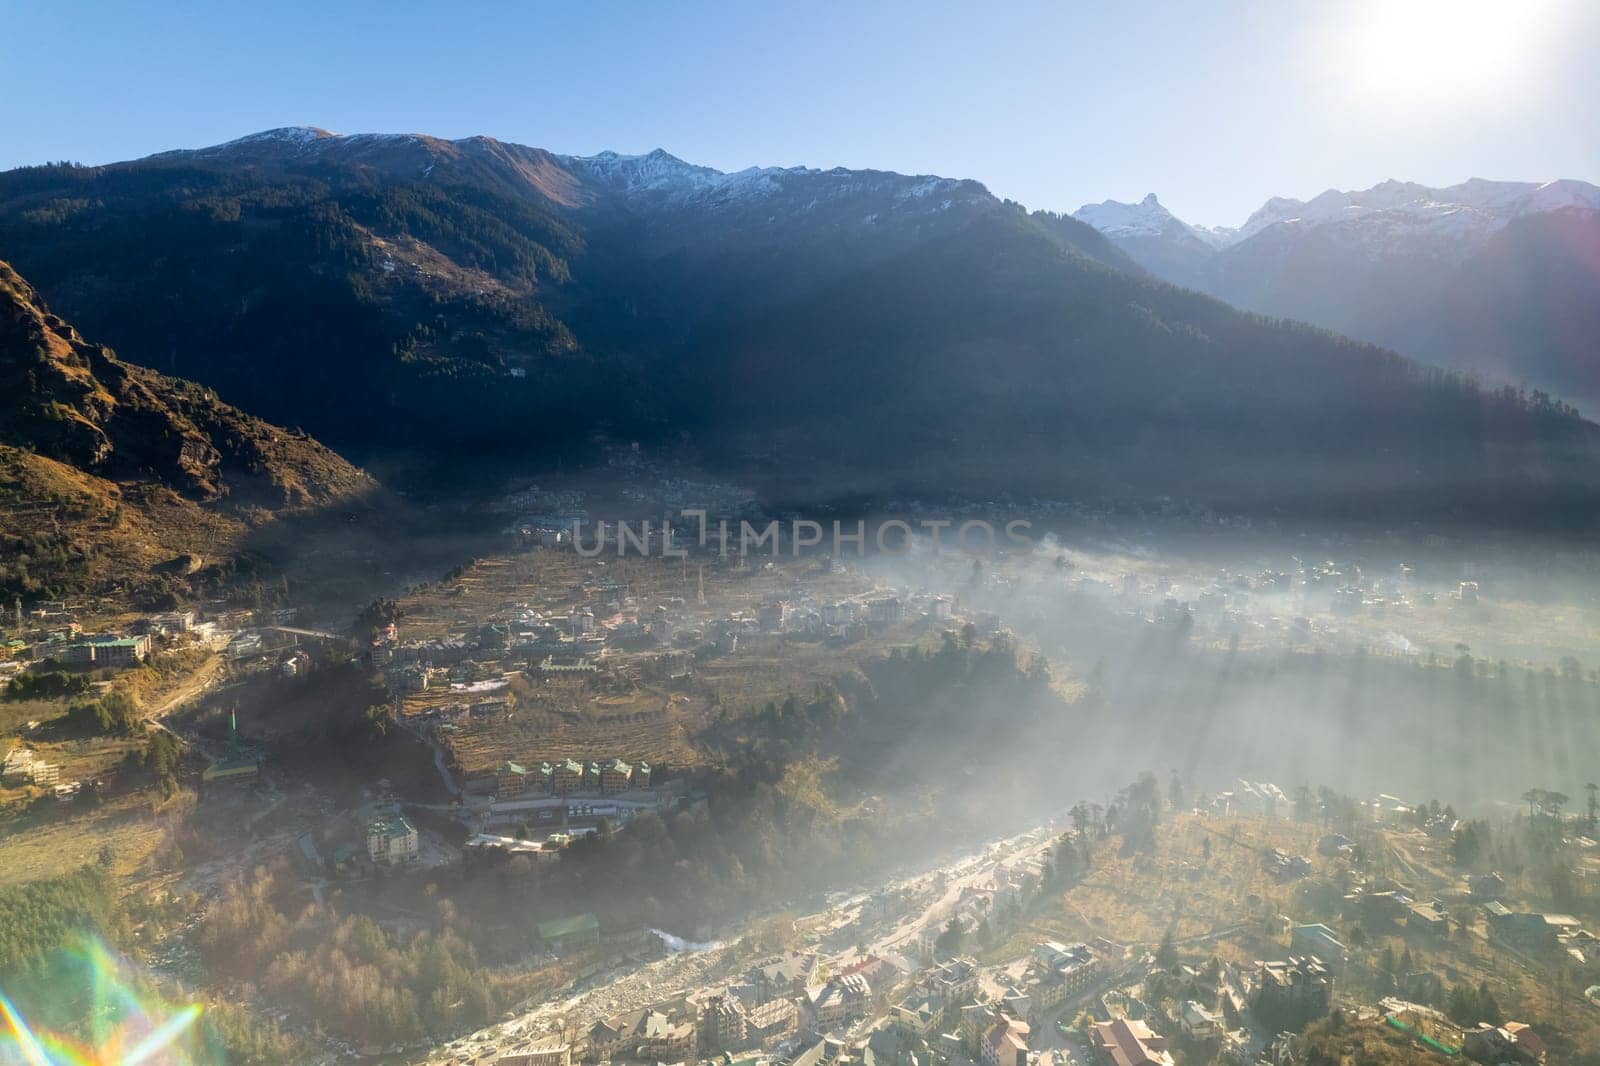 aerial drone shot gaining height over fog covered valley town of manali hill station with himalaya range in distance showing this popular tourist destination by Shalinimathur